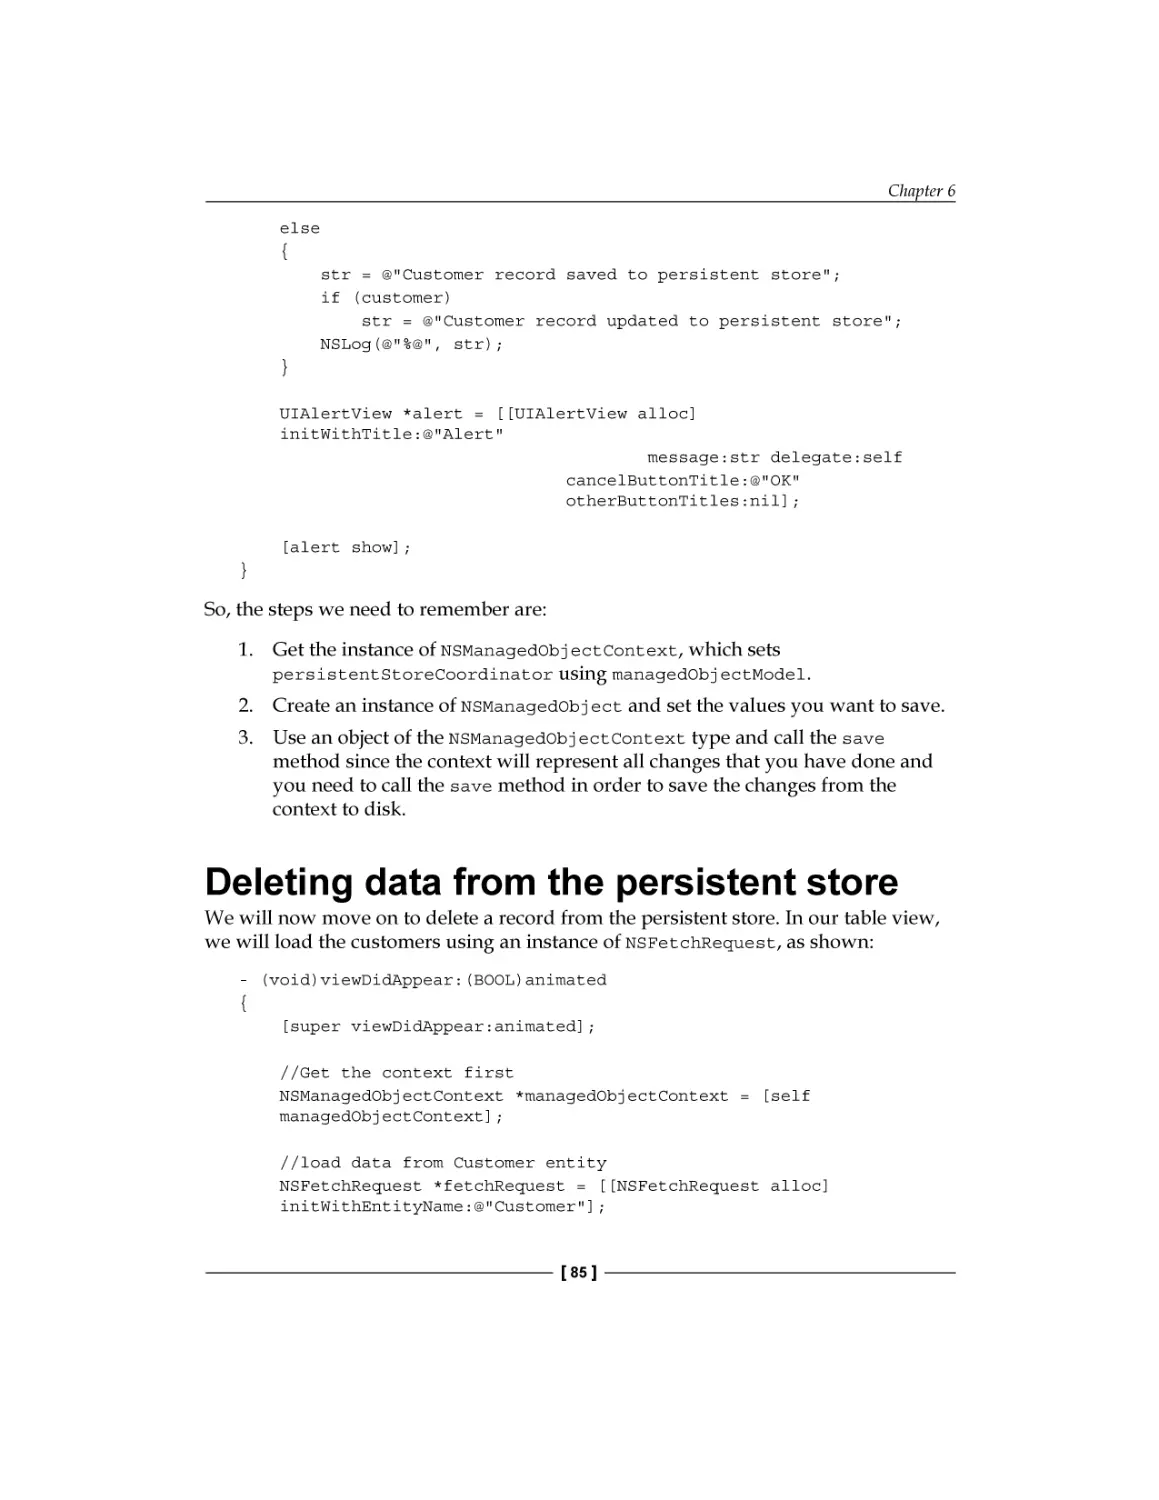 Deleting data from the persistent store